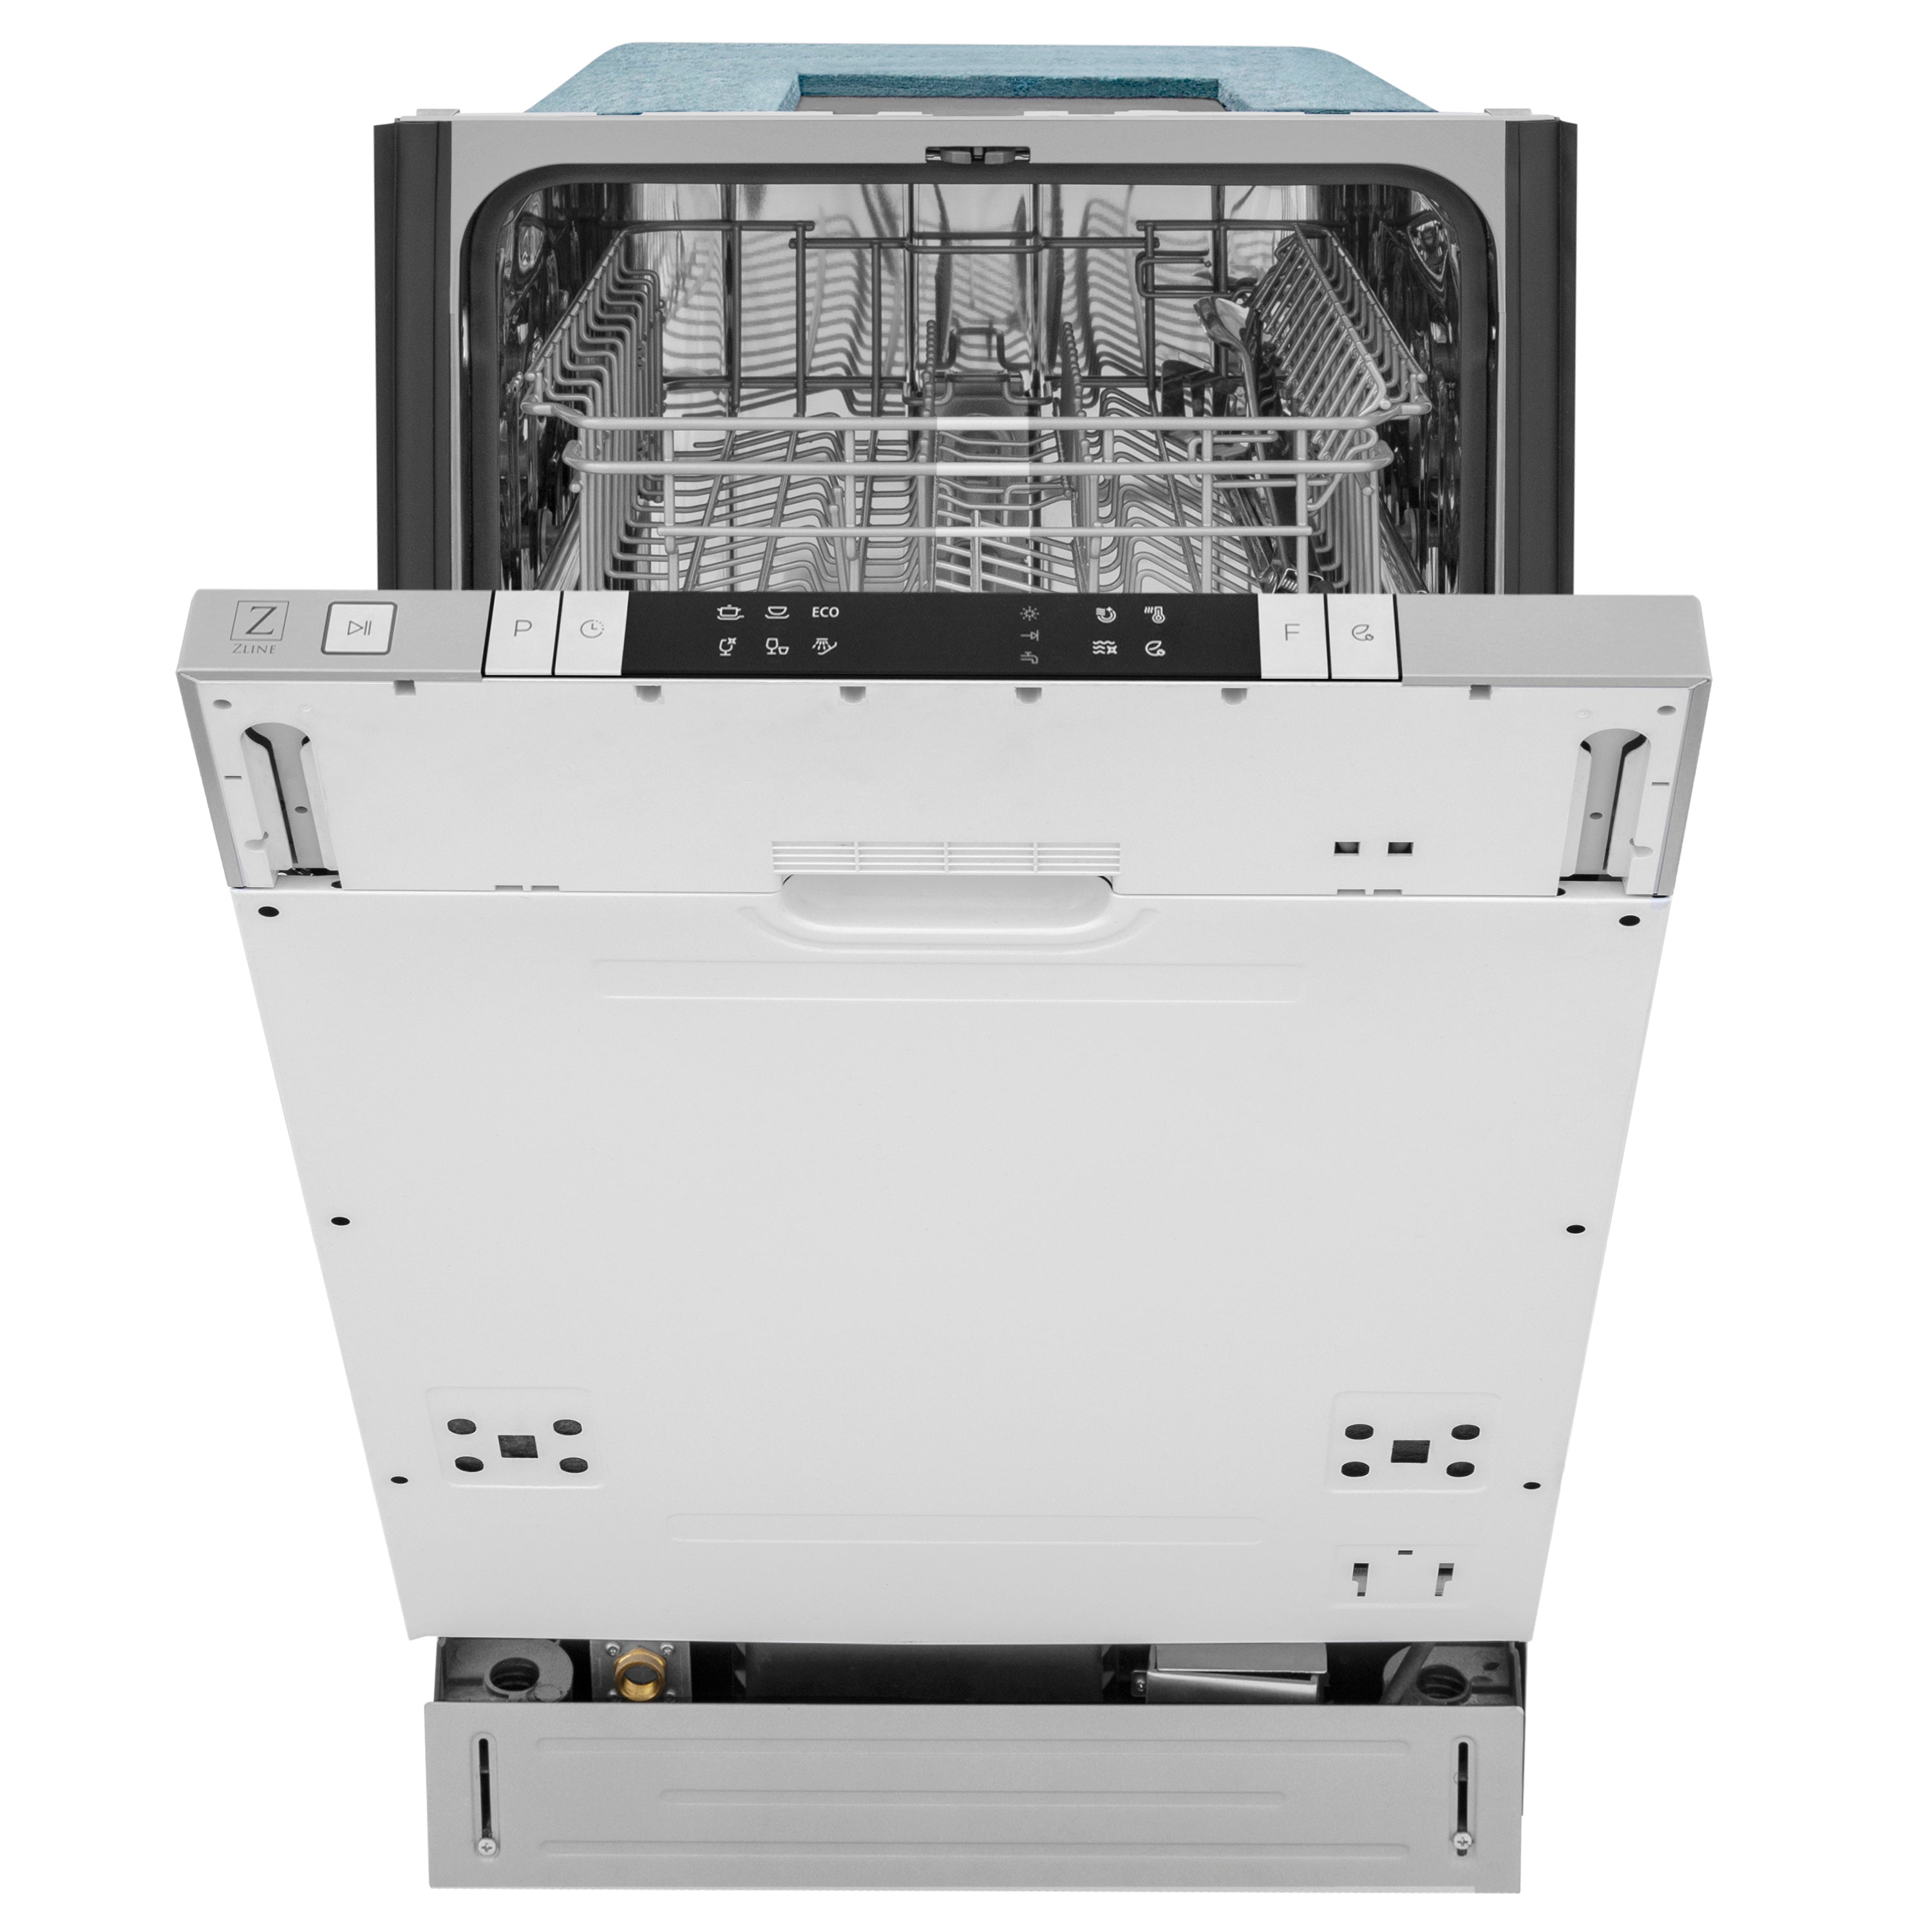 ZLINE 18 in. Compact Panel Ready Top Control Dishwasher with Stainless Steel Tub, 54dBa (DW7714-18) - New Star Living